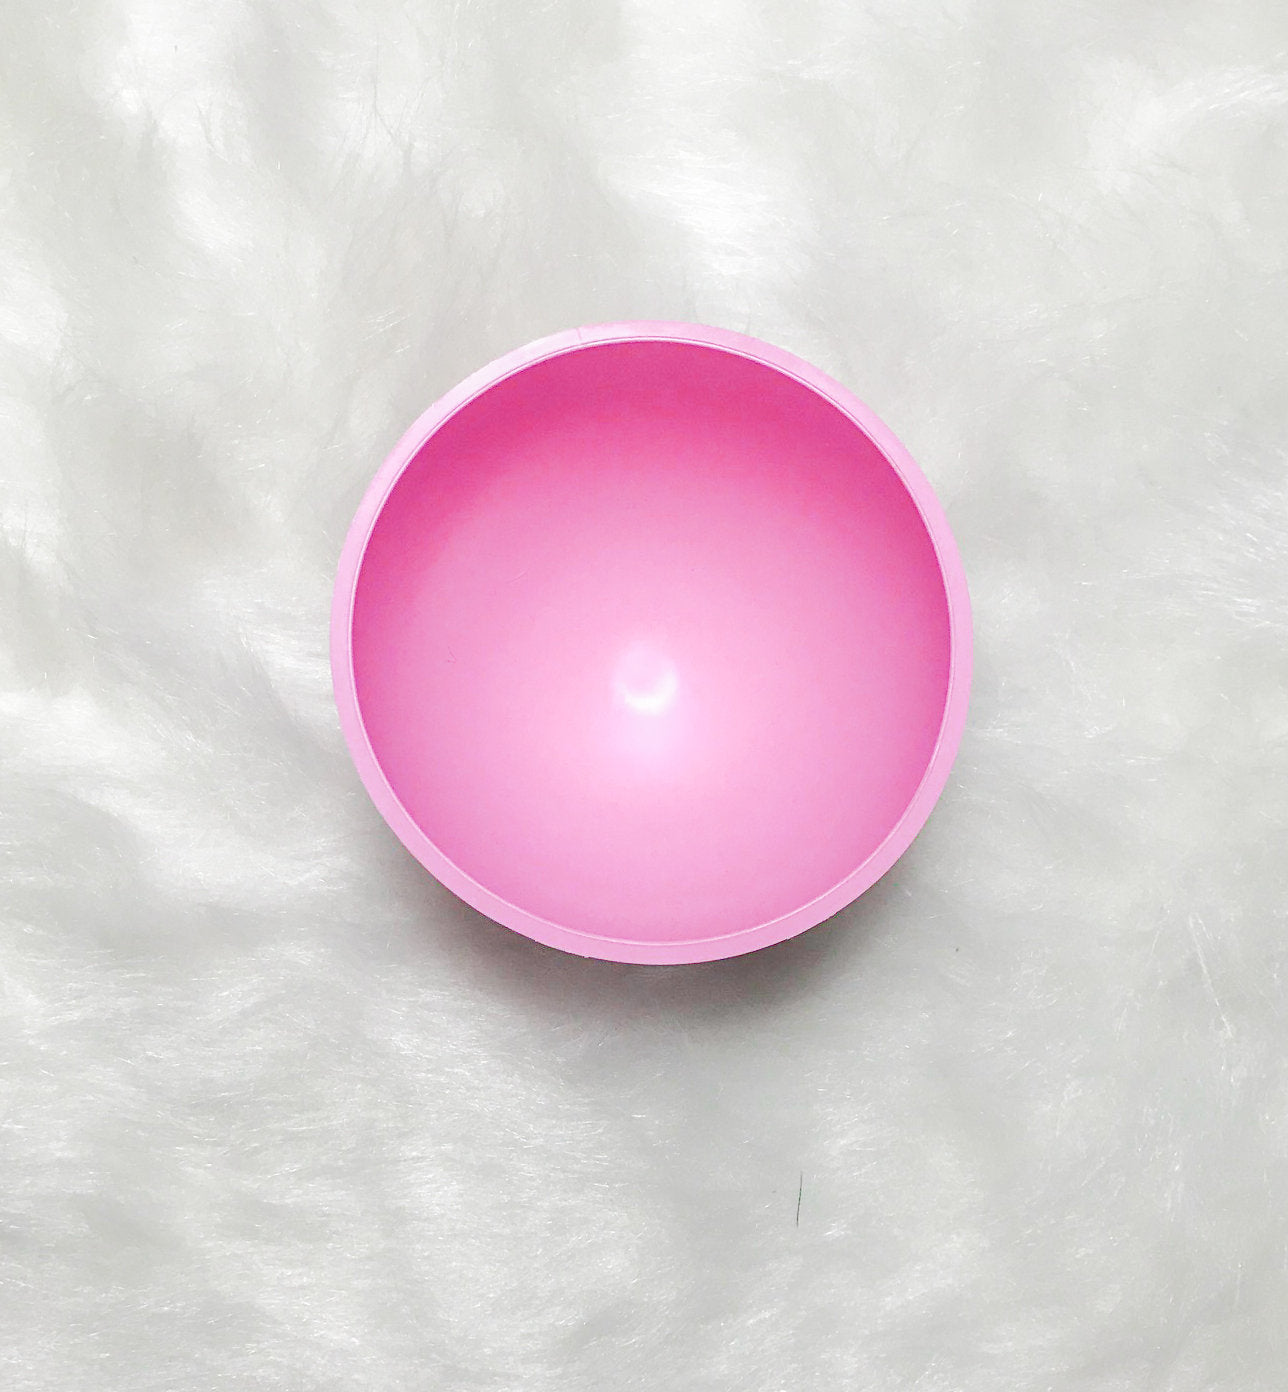 Rubber Mixing Bowls in Pink - Flexible, Medical Grade